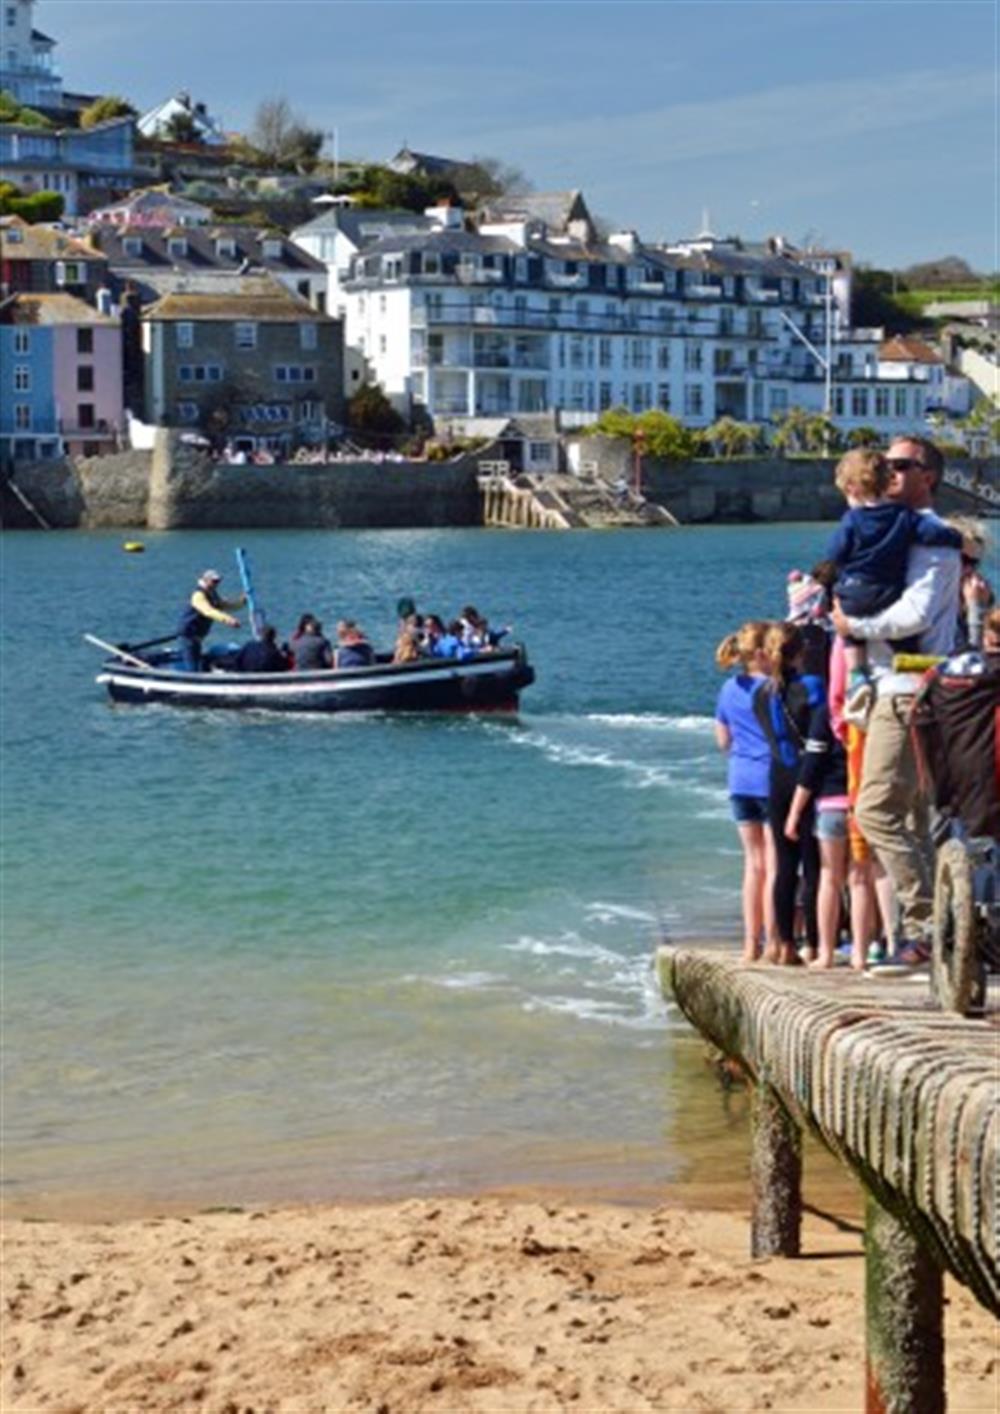 The foot ferry to Salcombe is a lovely way to take a trip to the popular town.